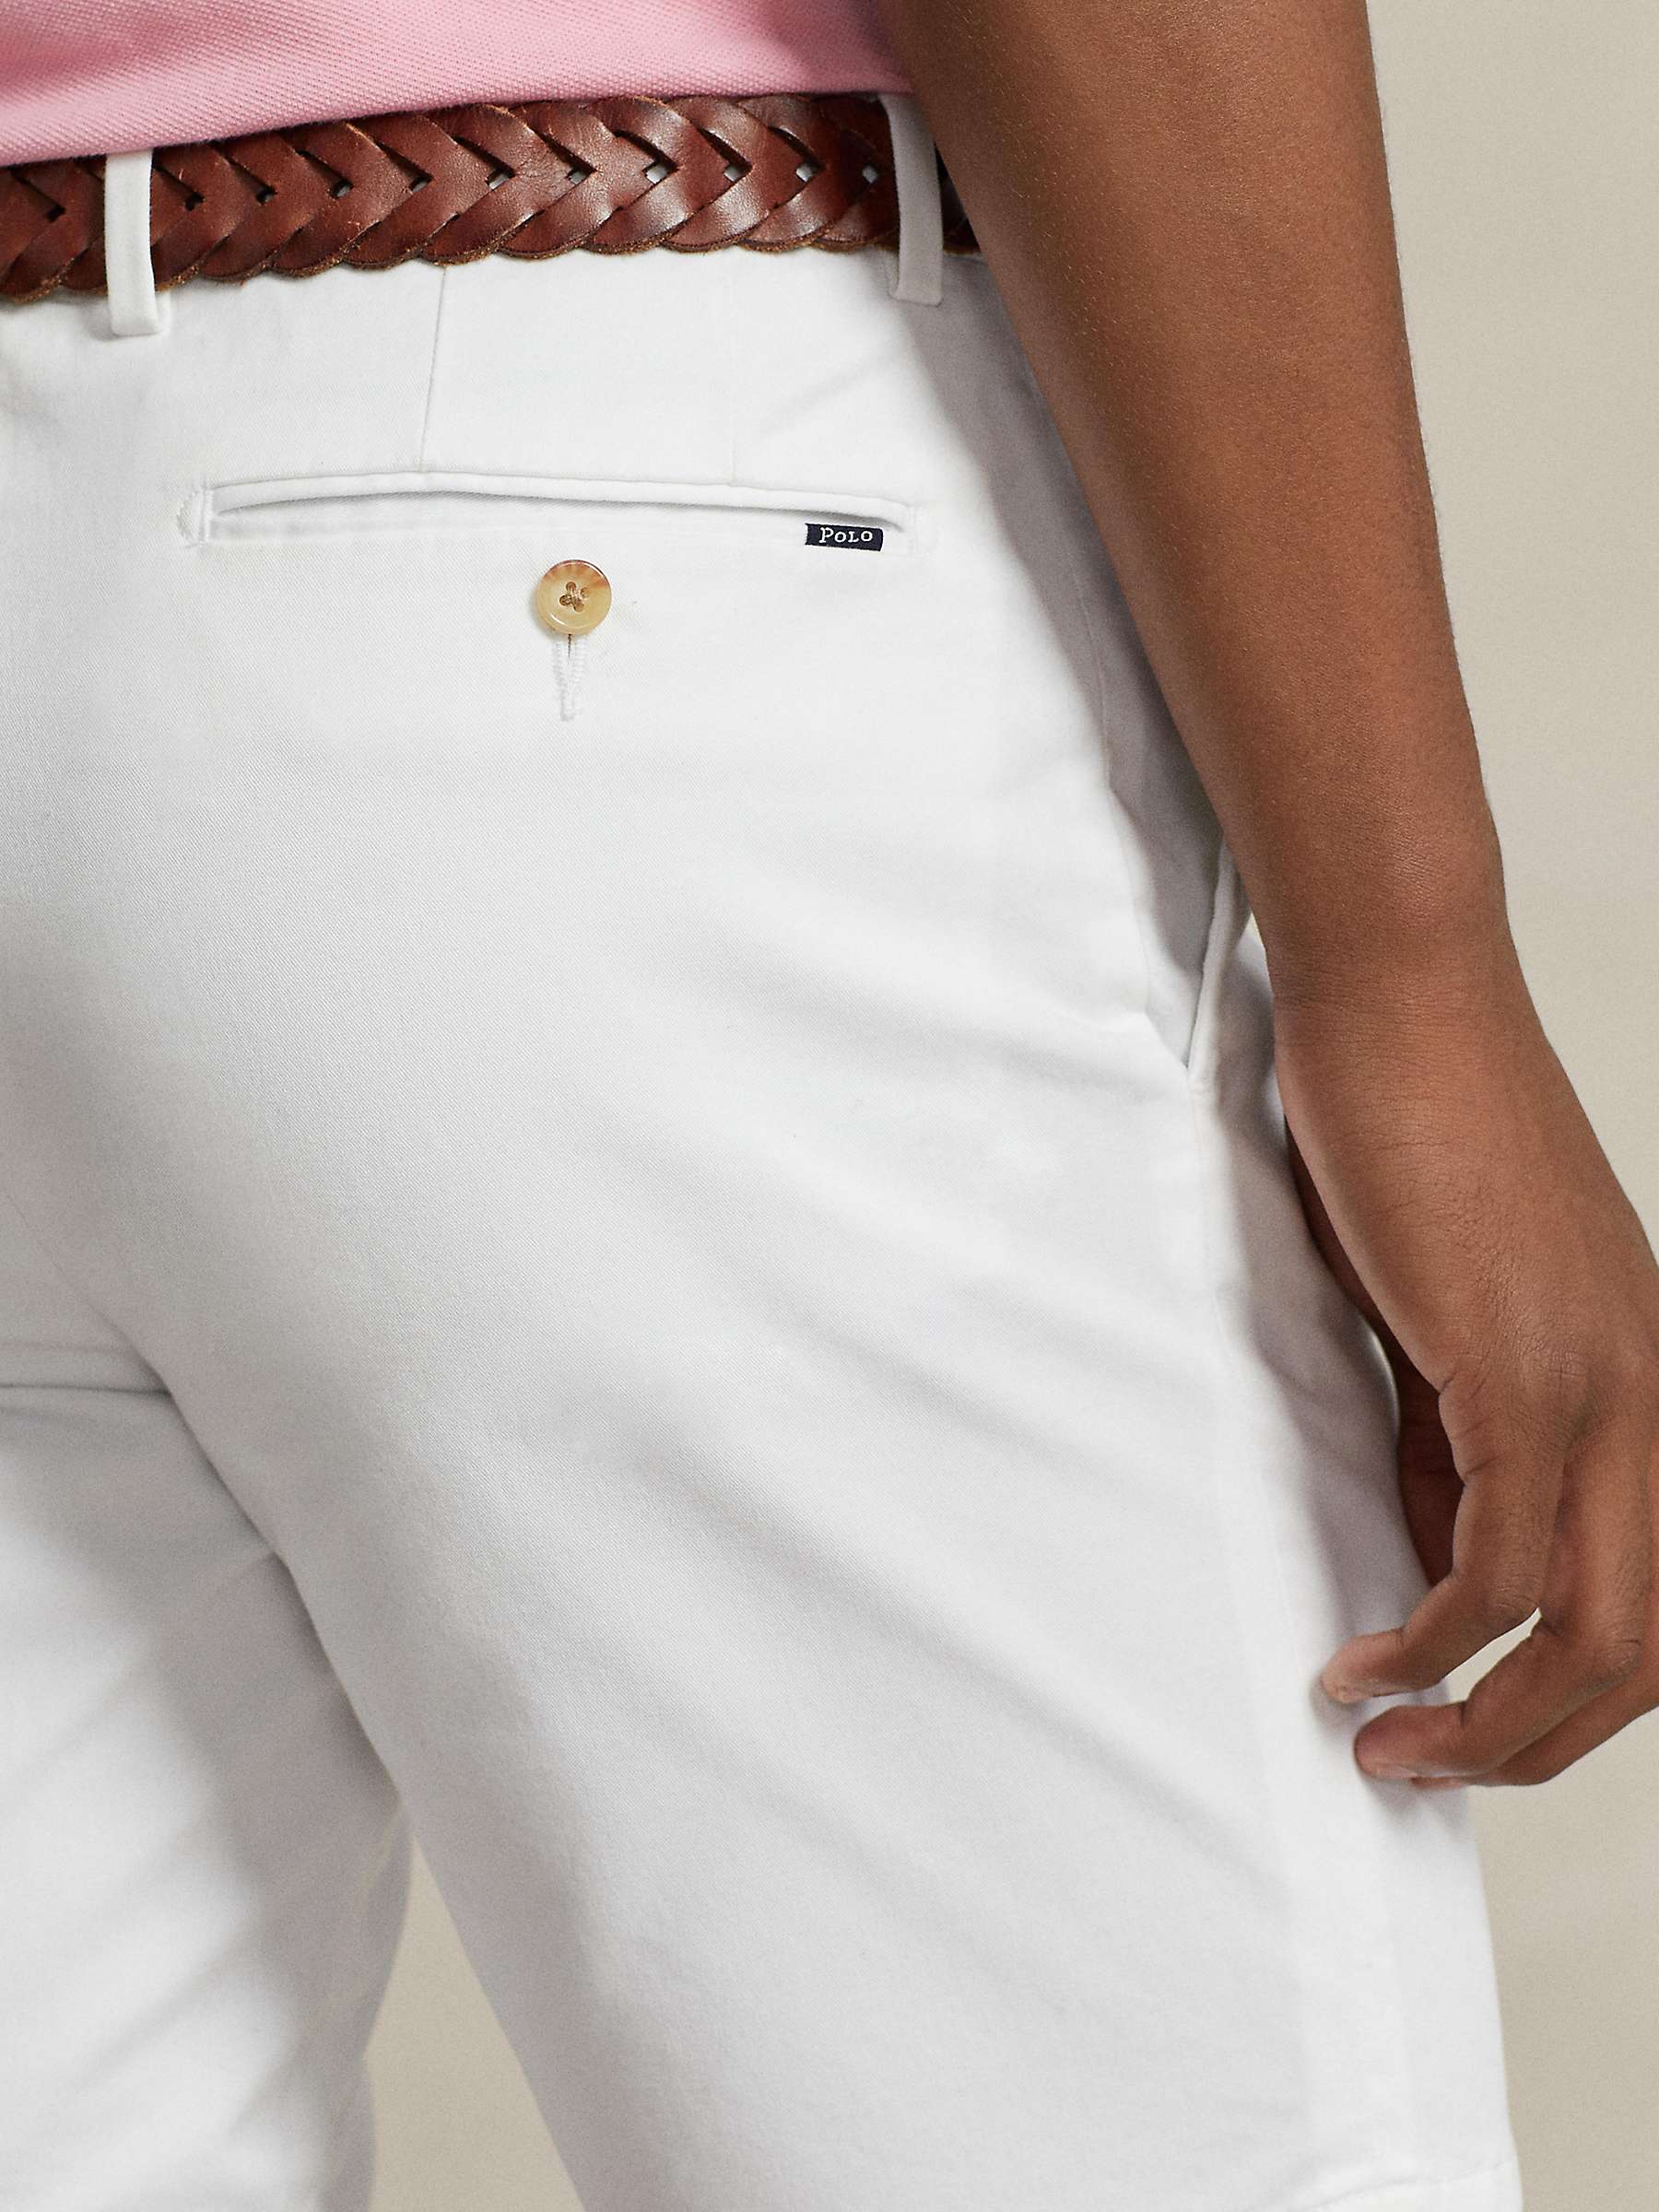 Buy Polo Ralph Lauren Stretch Slim Fit Chino Shorts Online at johnlewis.com